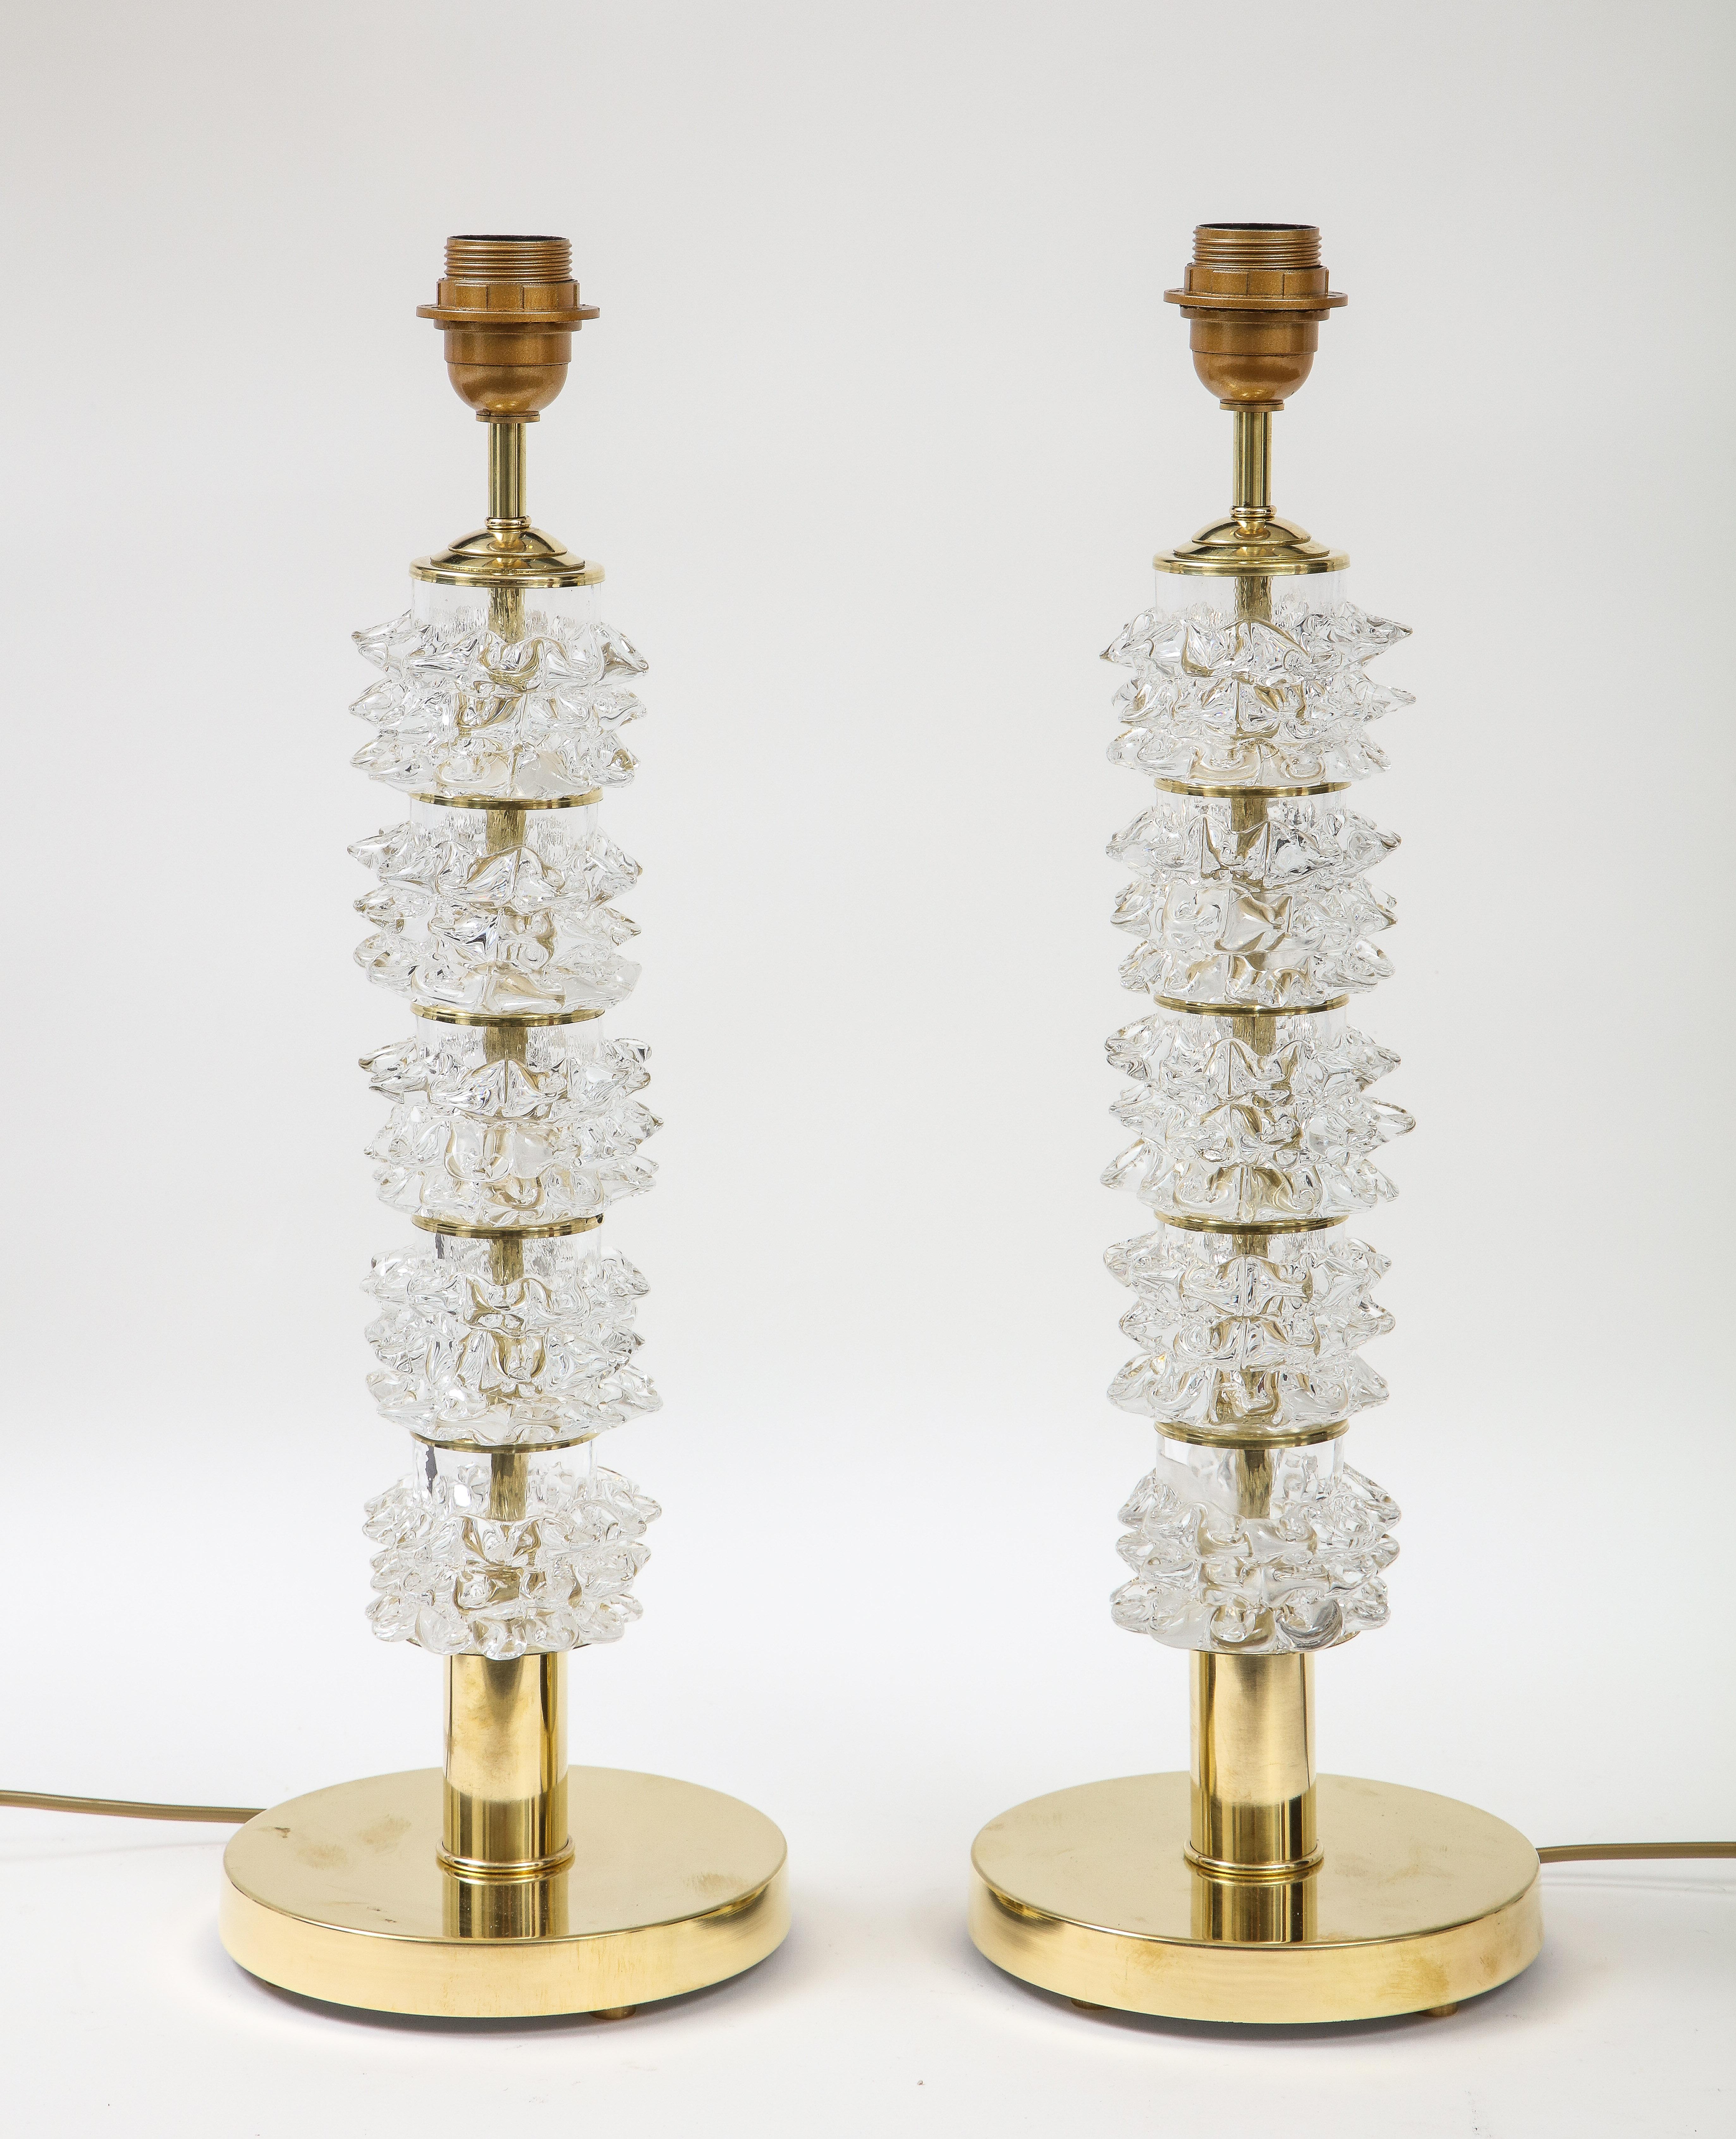 Pair of handblown clear Murano glass lamps in the iconic manner of the 